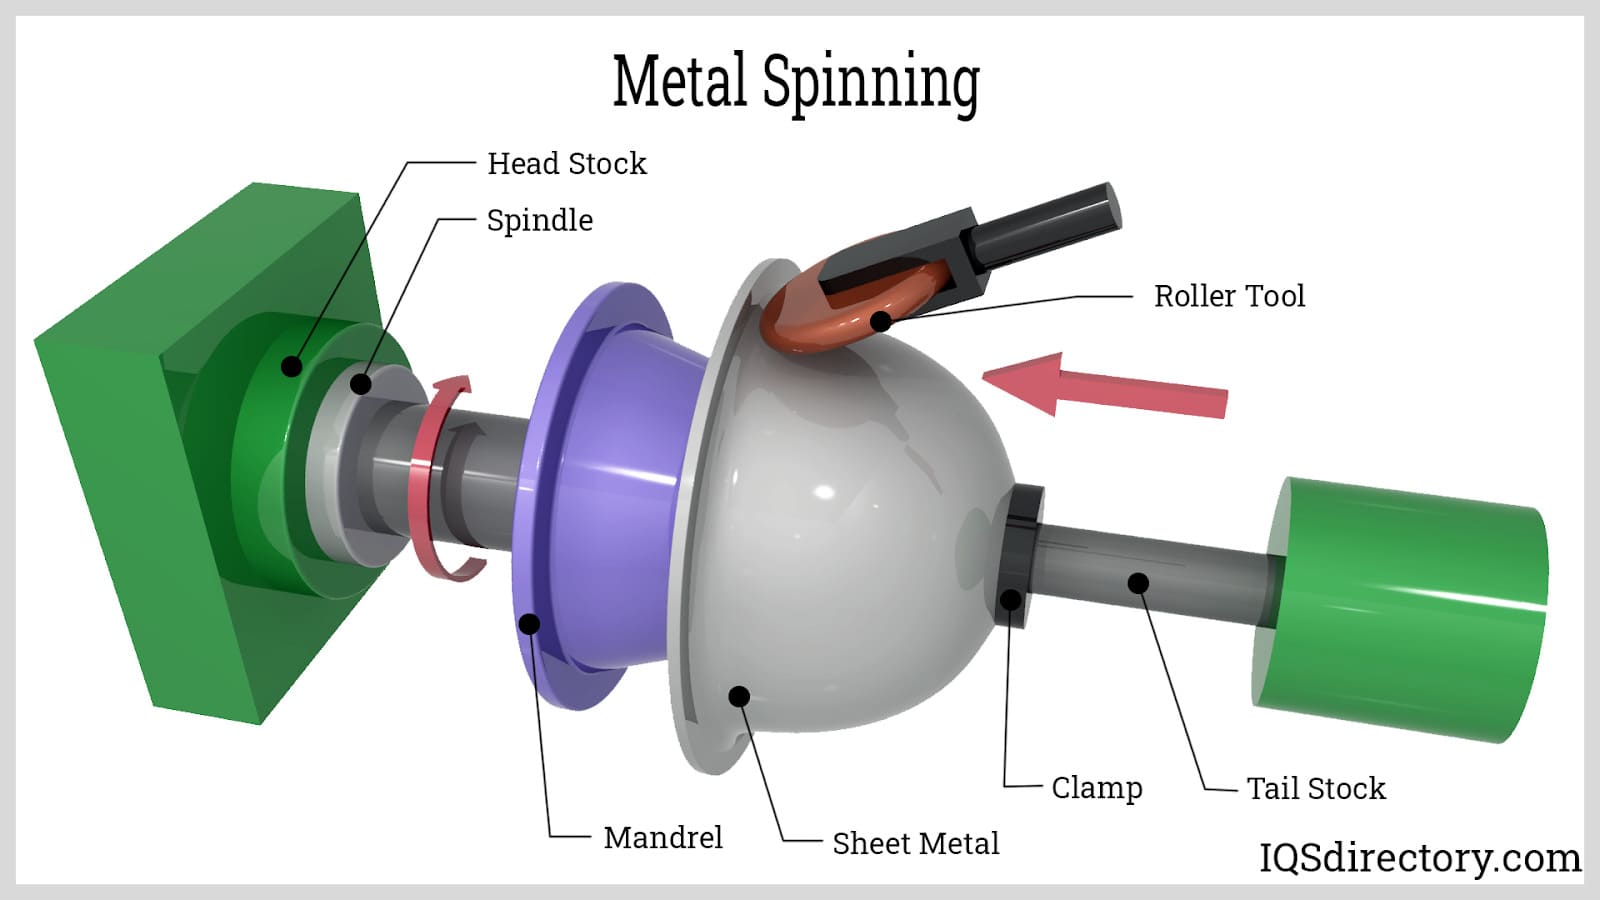 how fast does a metal lathe spin?